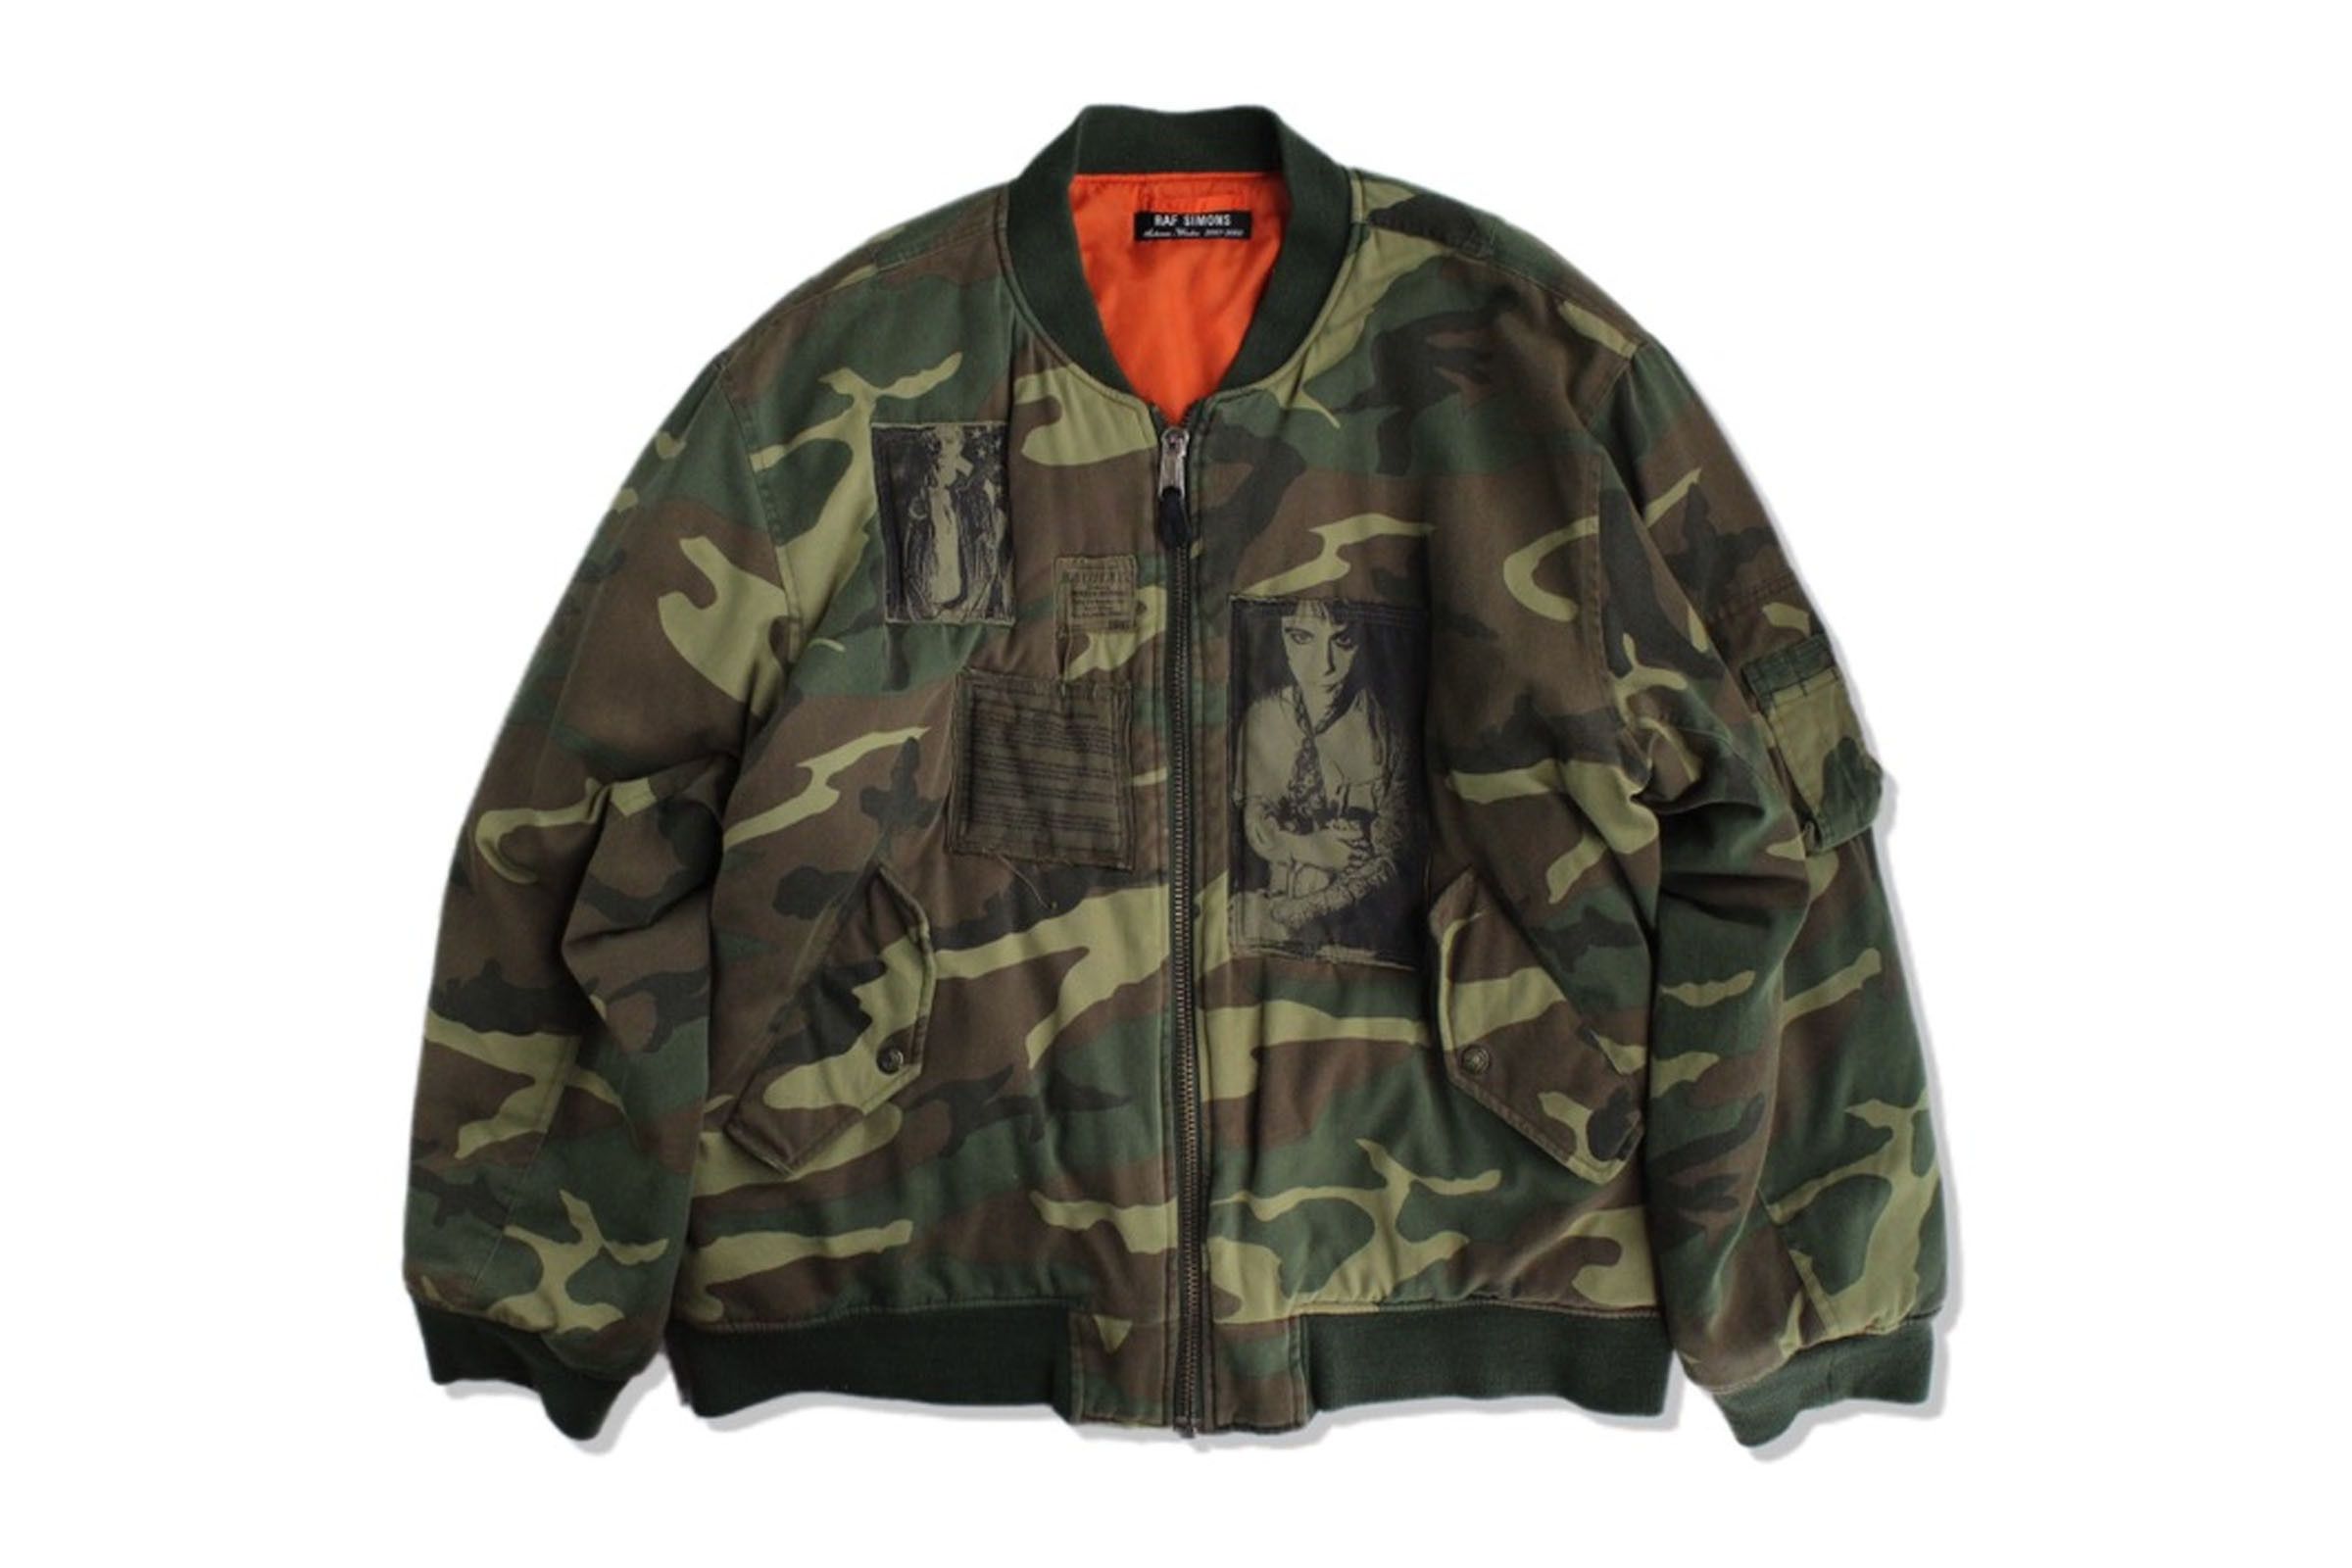 Most Expensive Items Sold on Grailed This Week: October 18, 2019